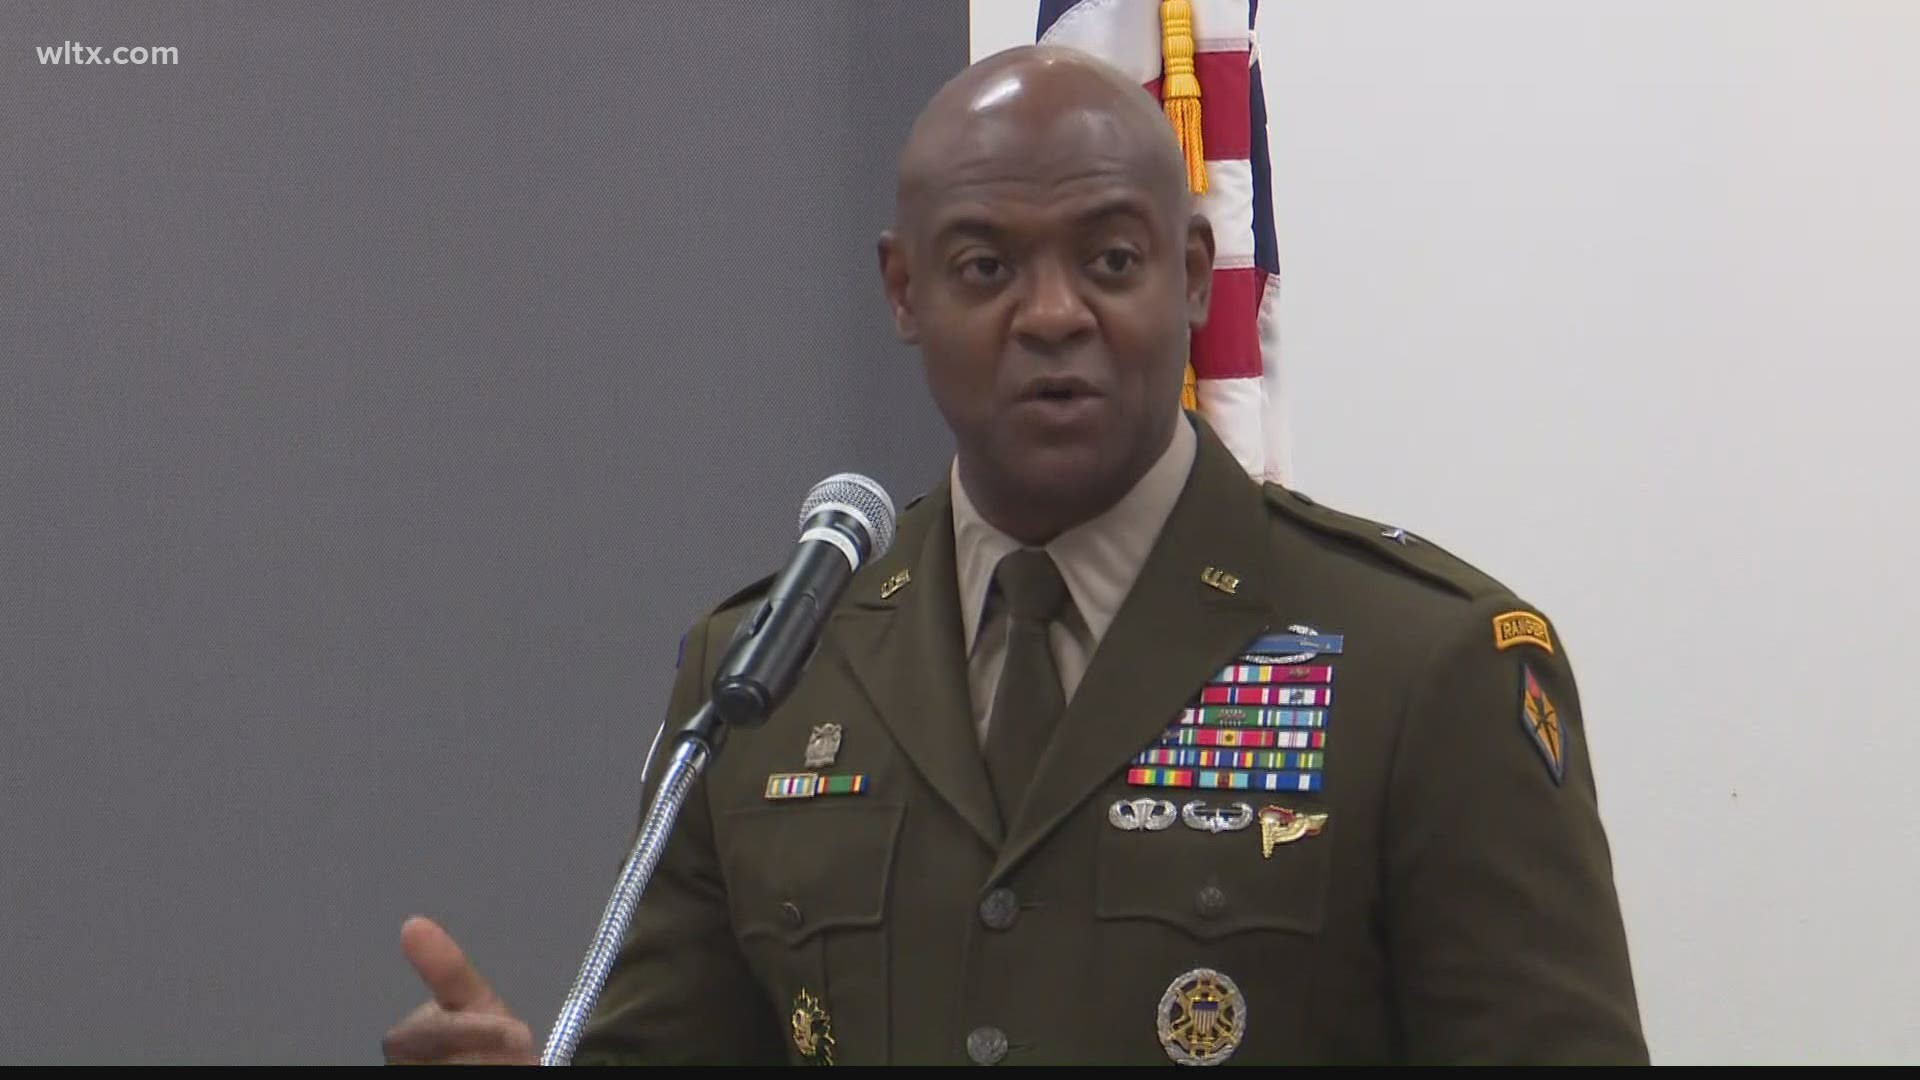 Brigadier General Milford Beagle will be leaving Fort Jackson to become the commanding General of the  10th Mountain Division at Fort Drum in NY.